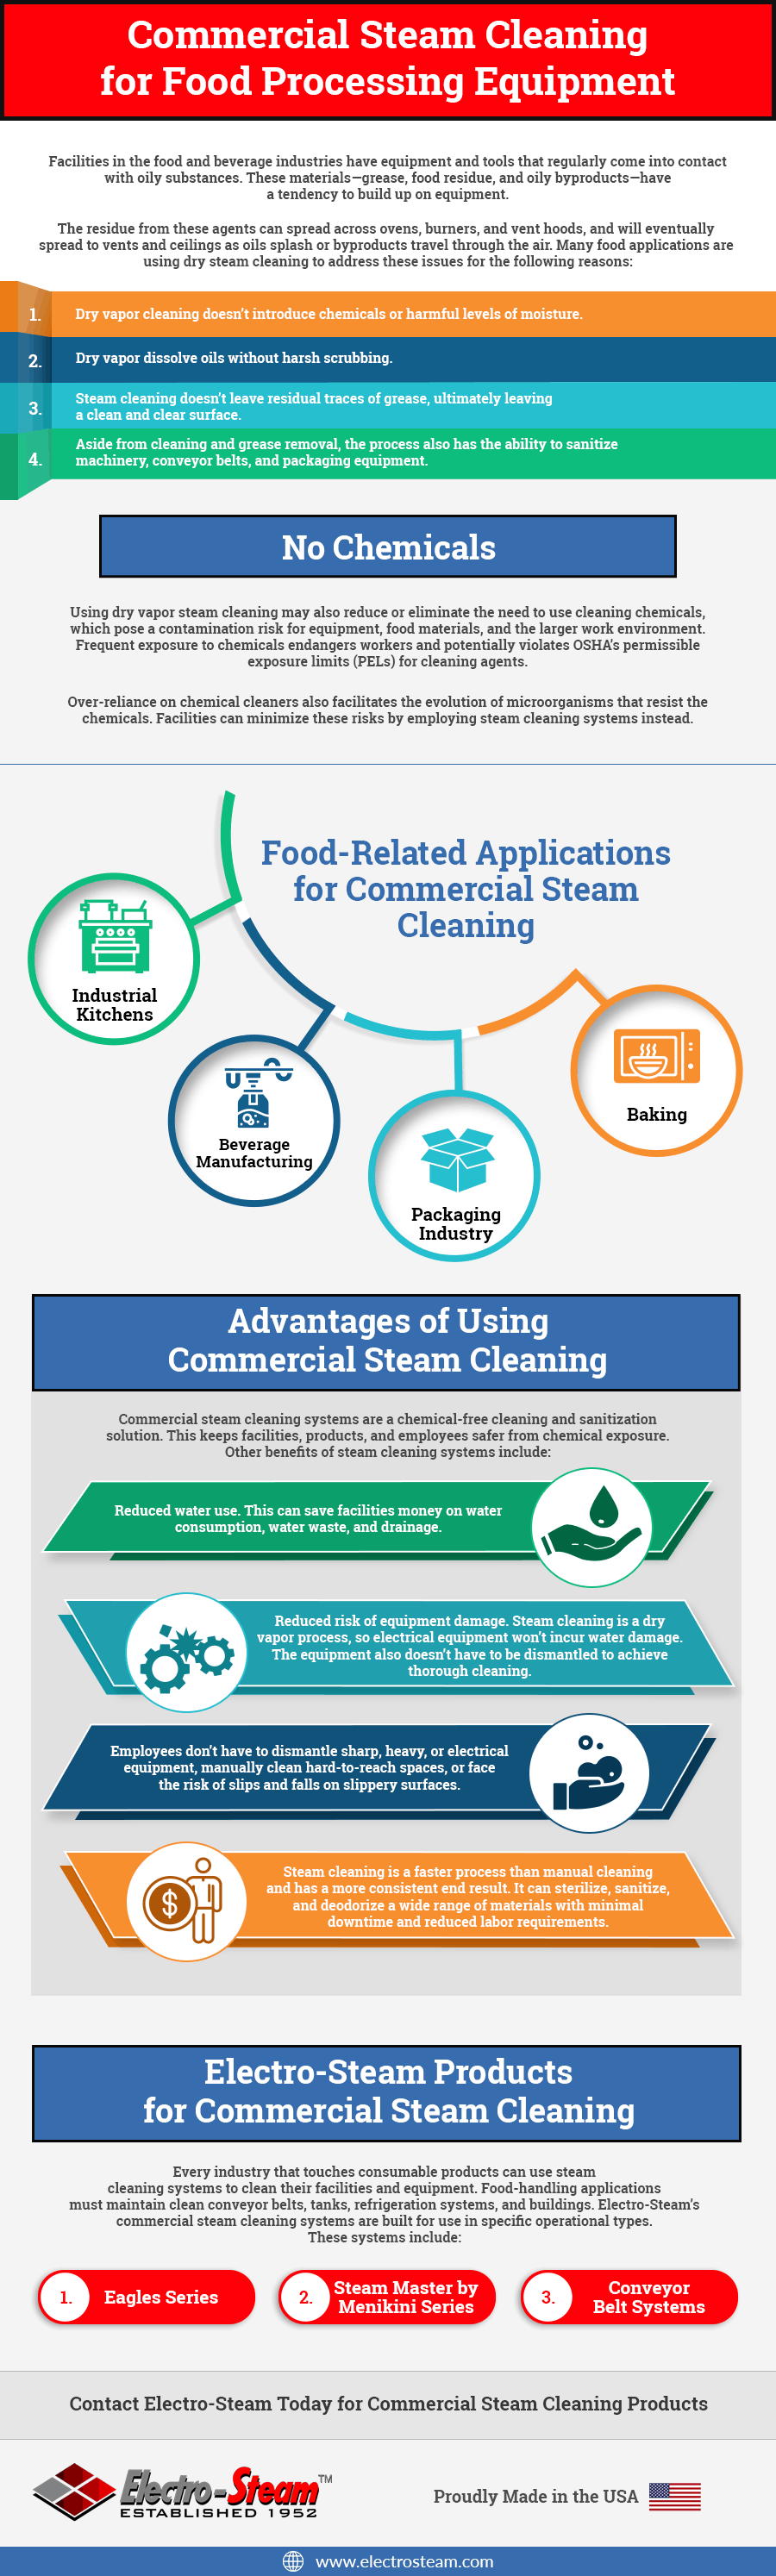 Commercial Steam Cleaning for Food Processing Equipment